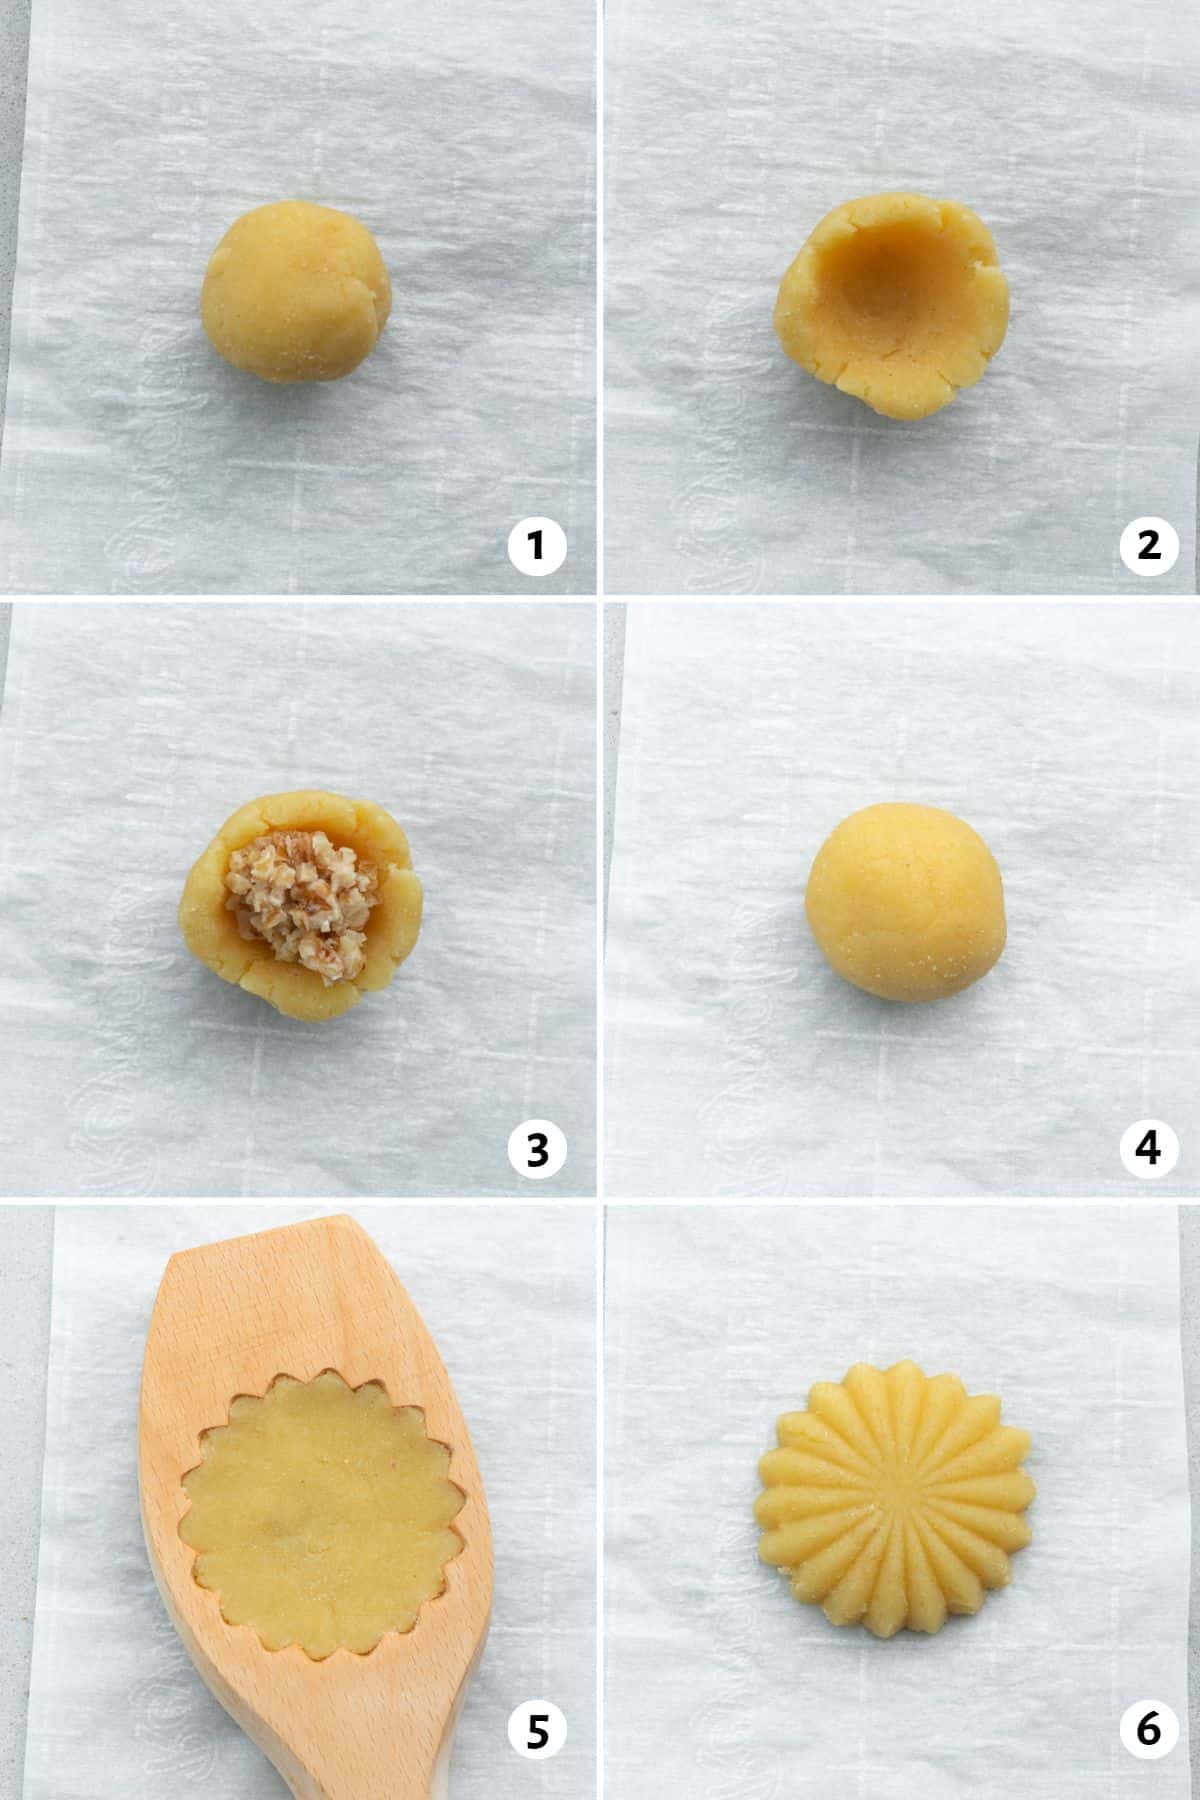 6 image collage making stuffed dough into shapes: 1- dough ball, 2- dough ball pressed into a cup, 3- walnut filling added, 4- dough balled up around filling, 5- dough pressed into mold, 6- dough after removed from mold.